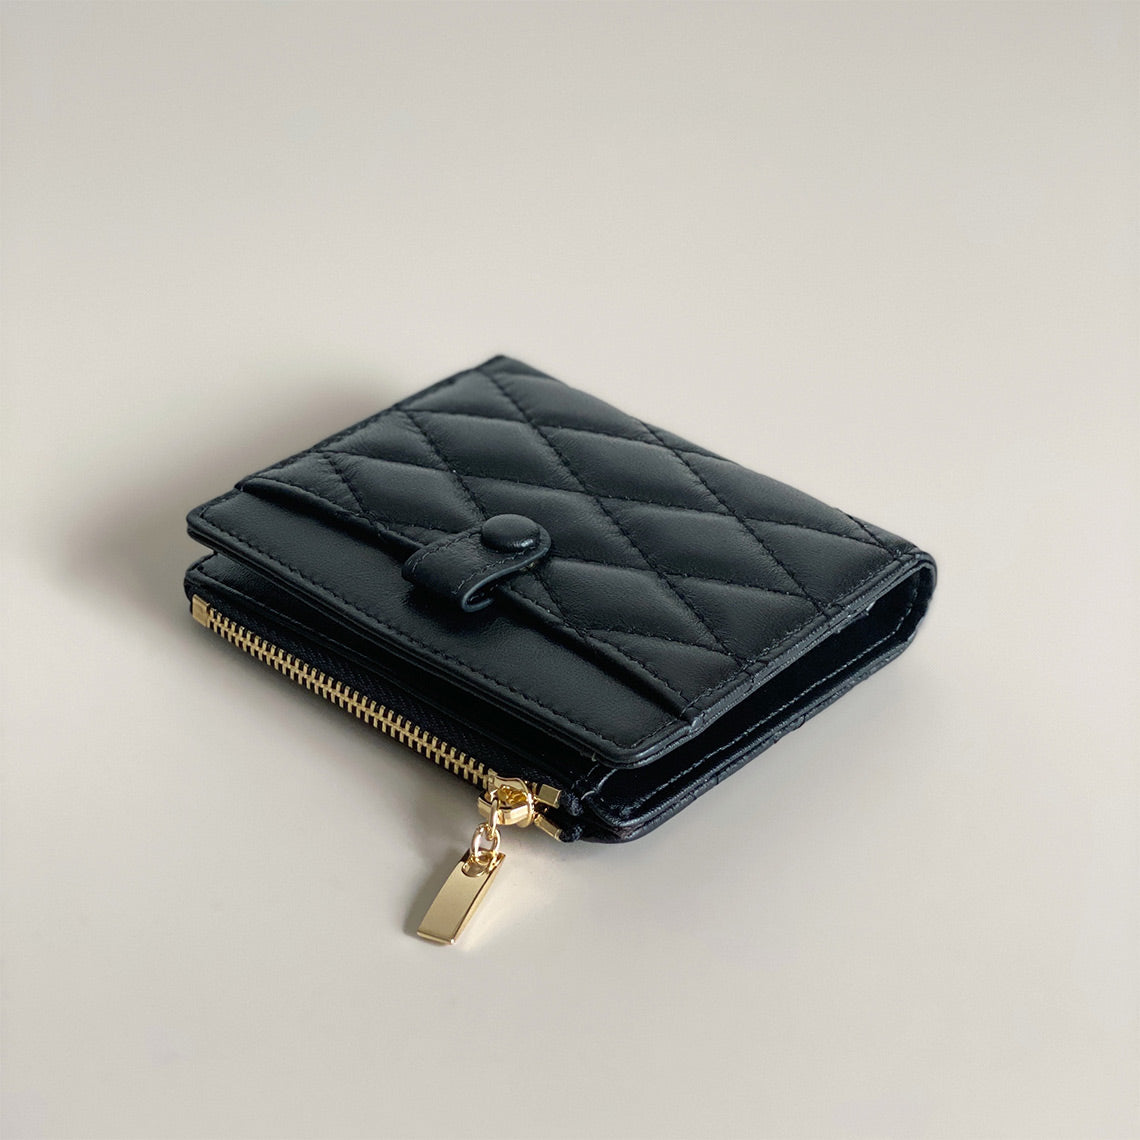 Black Leather Bifold Wallet | Sheep Leather Wallet Small Purse - POPSEWING™